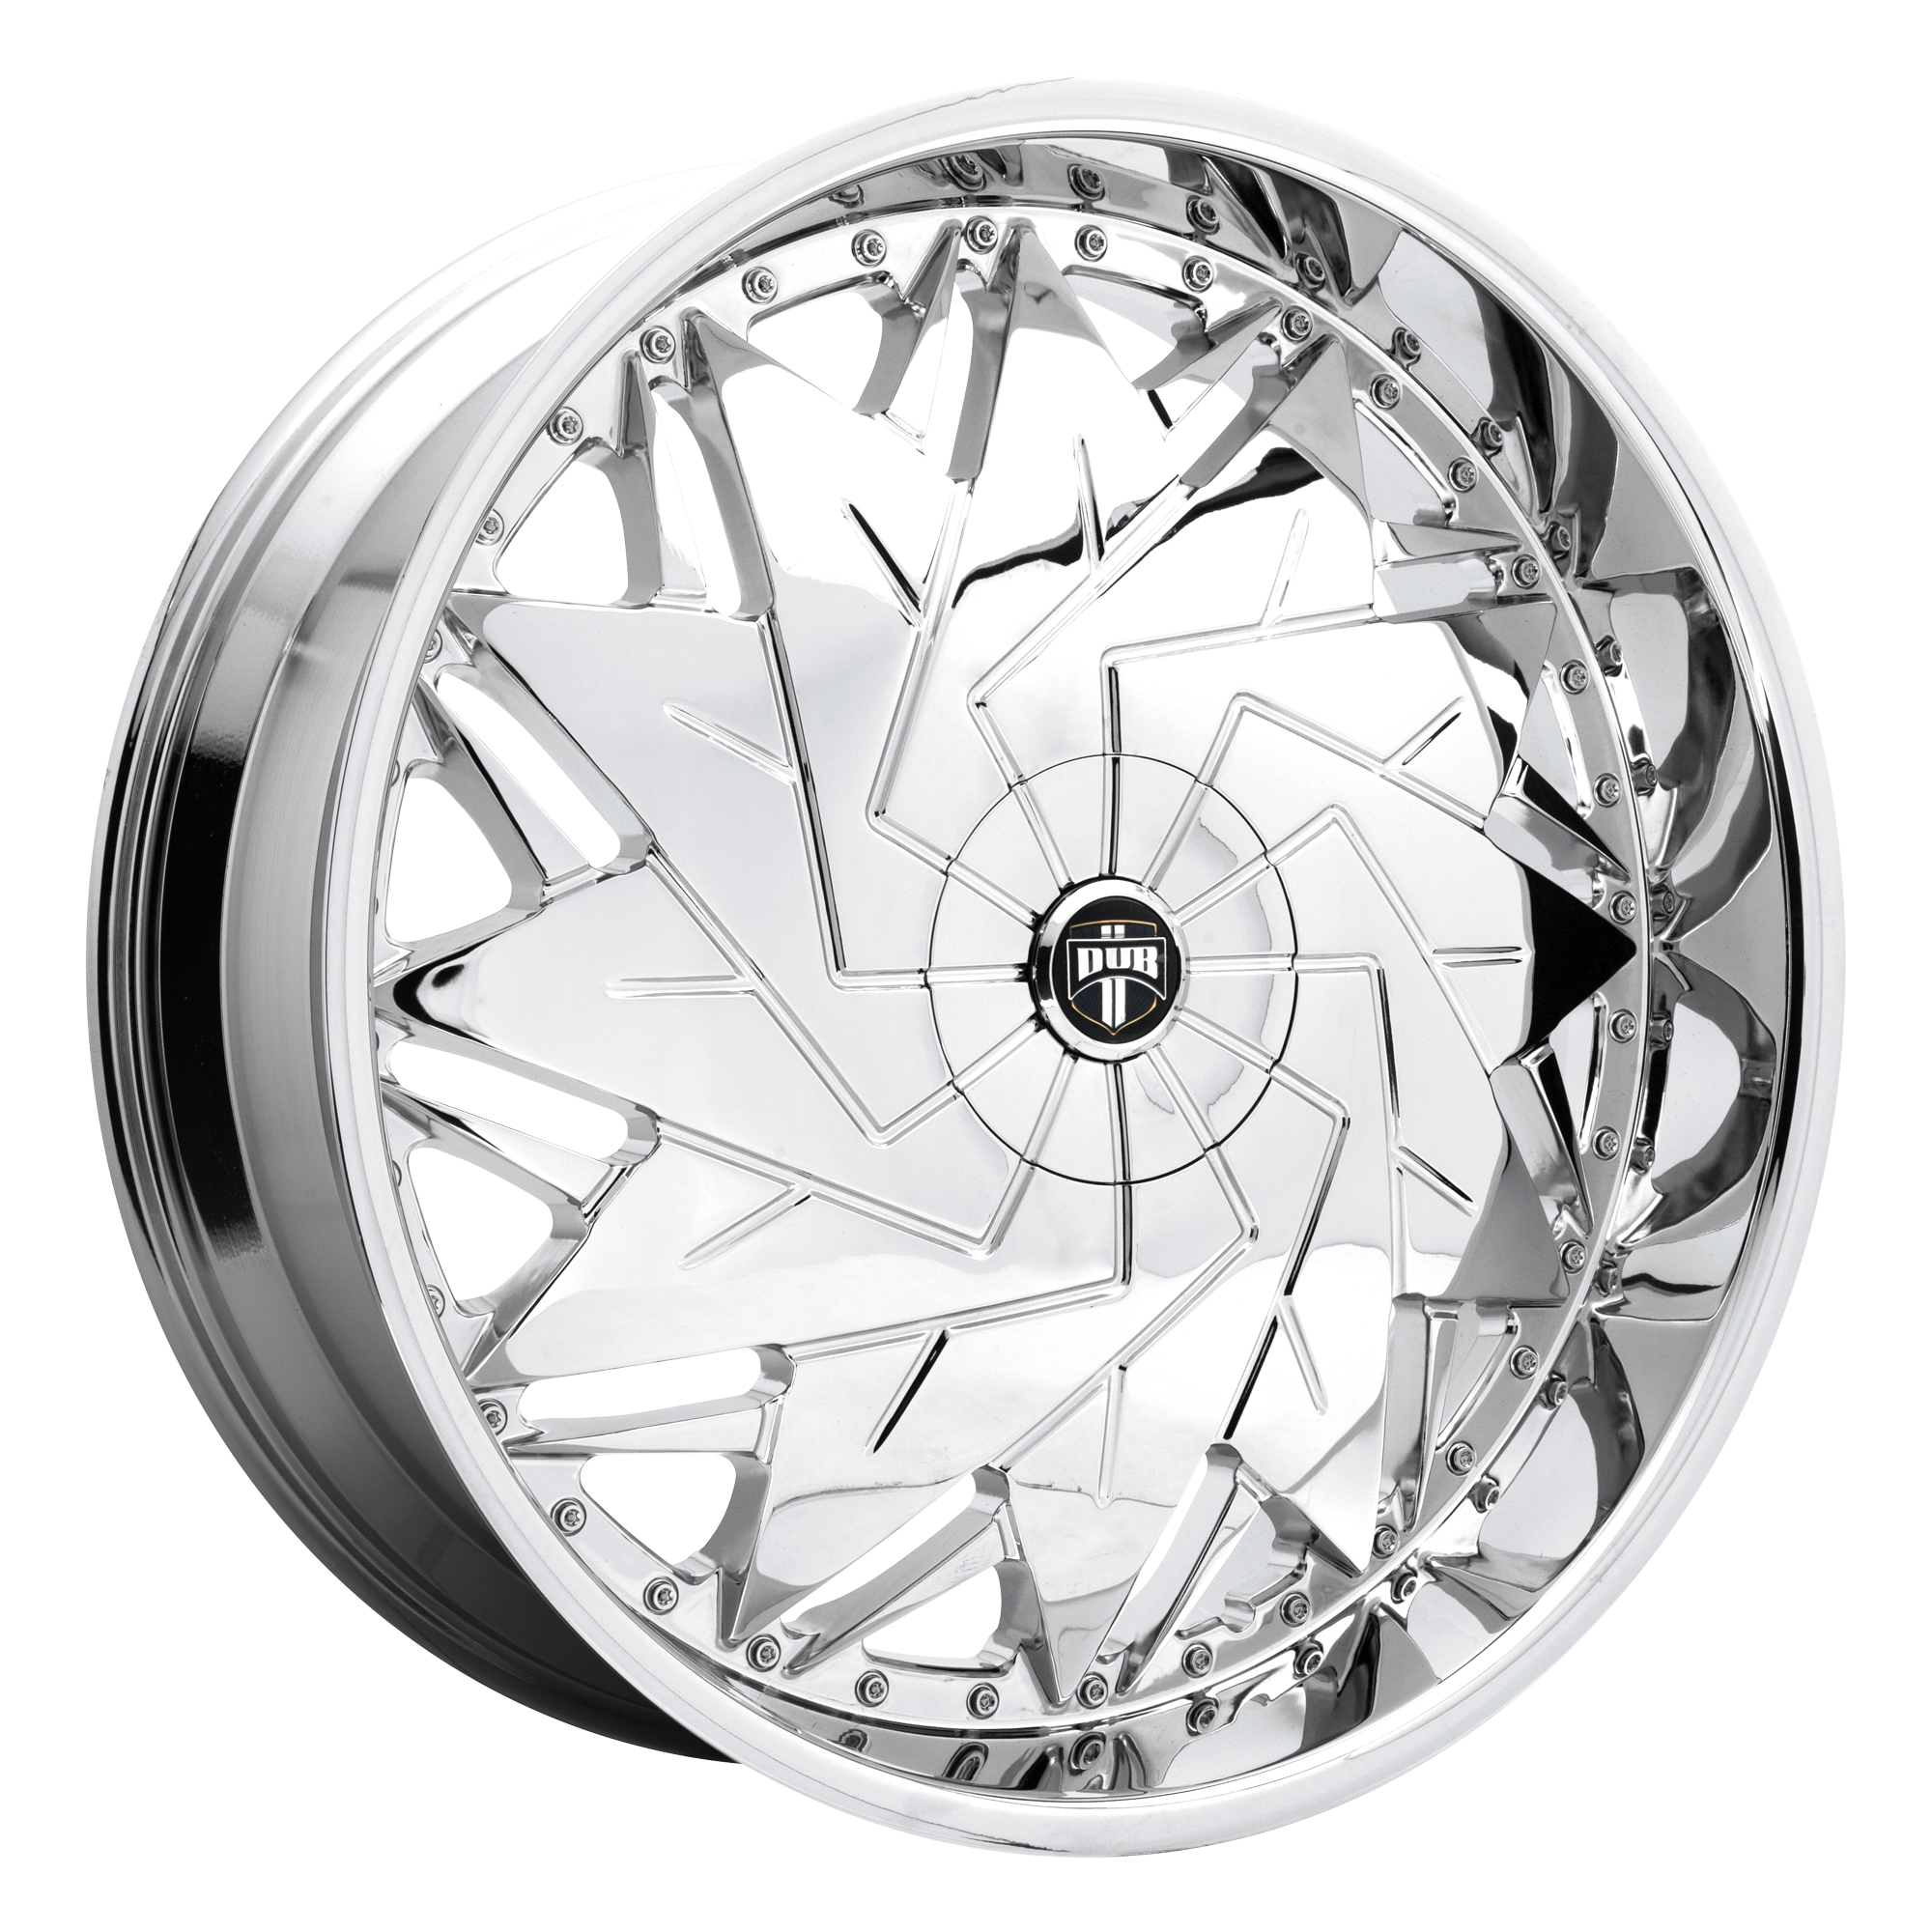 DAZR 26x9 5x115.00/5x120.00 CHROME PLATED (15 mm) - Tires and Engine Performance